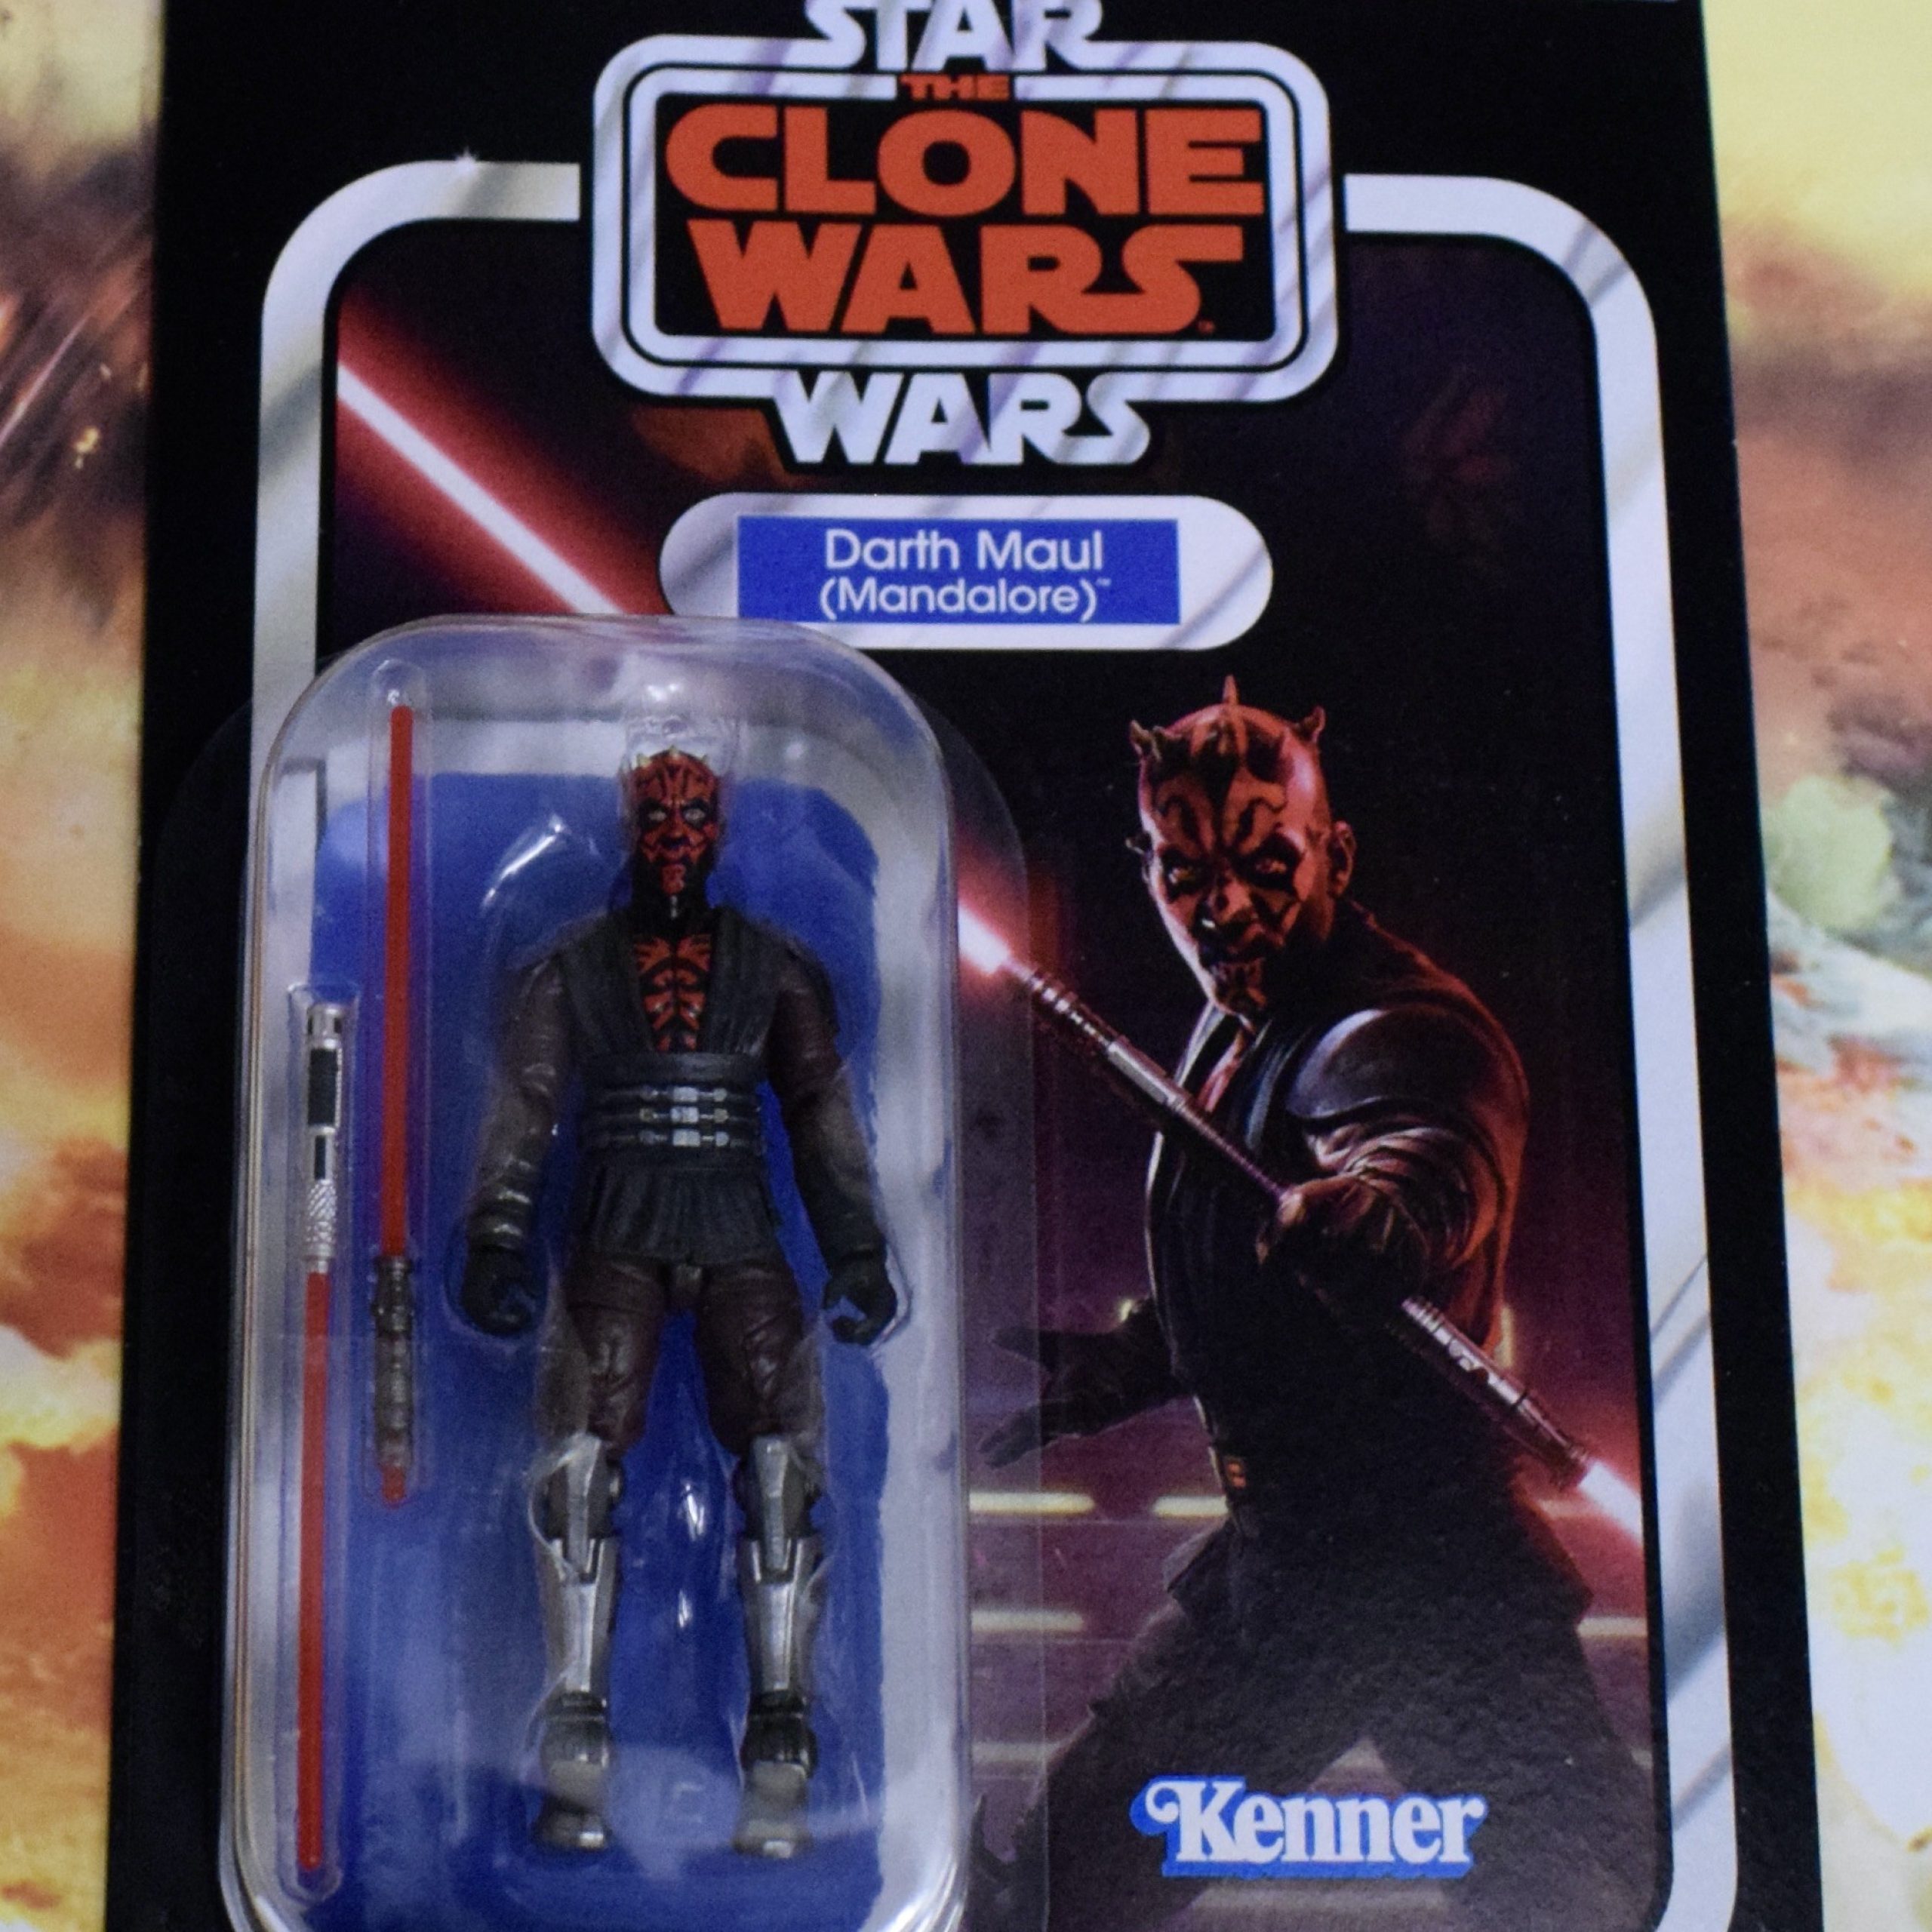 Star Wars The Vintage Collection The Clone Wars Darth Maul Mandalore VC201